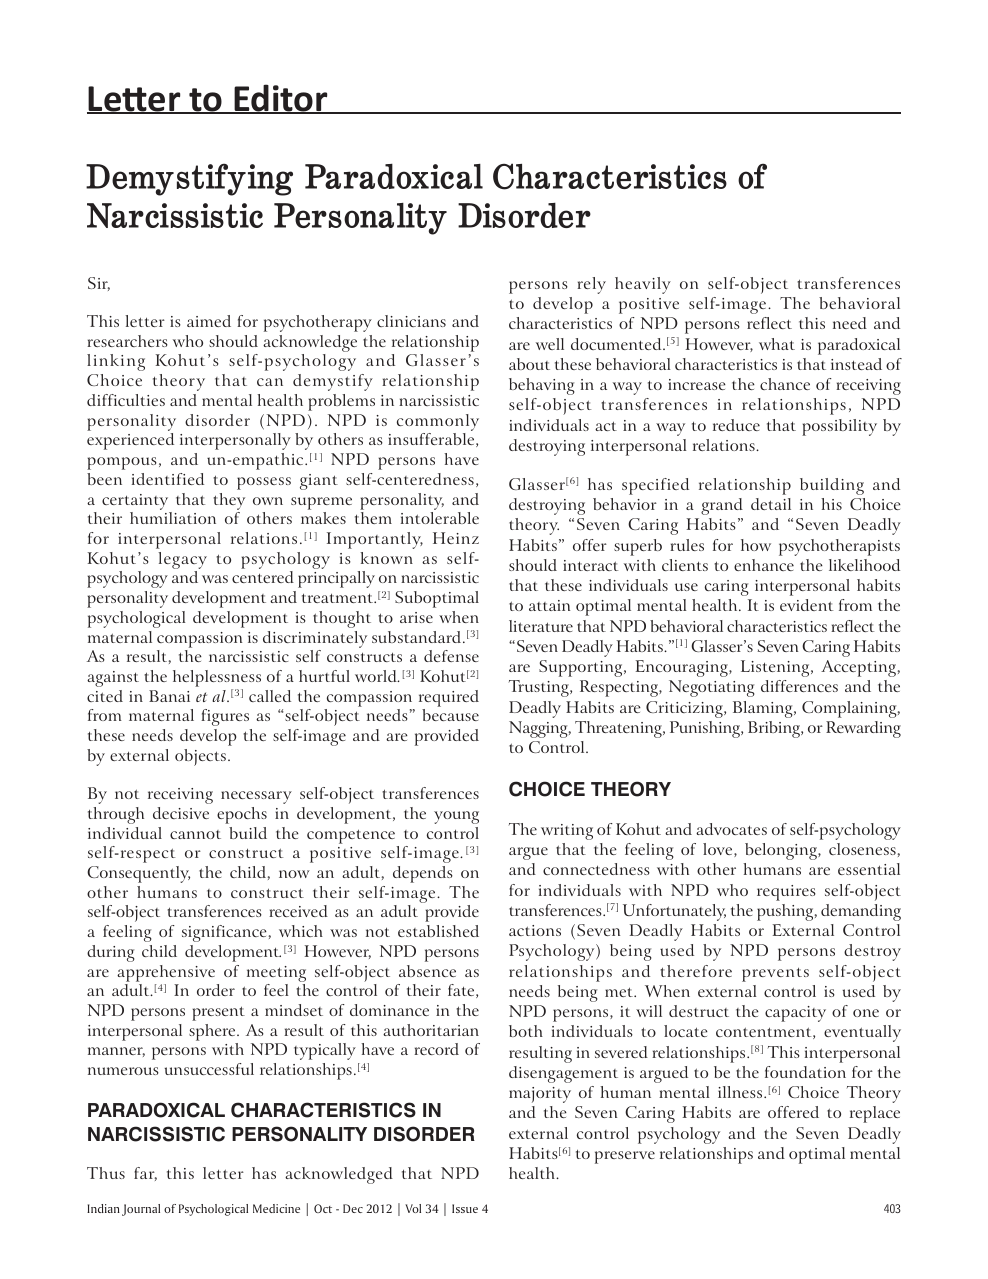 narcissistic personality disorder research paper